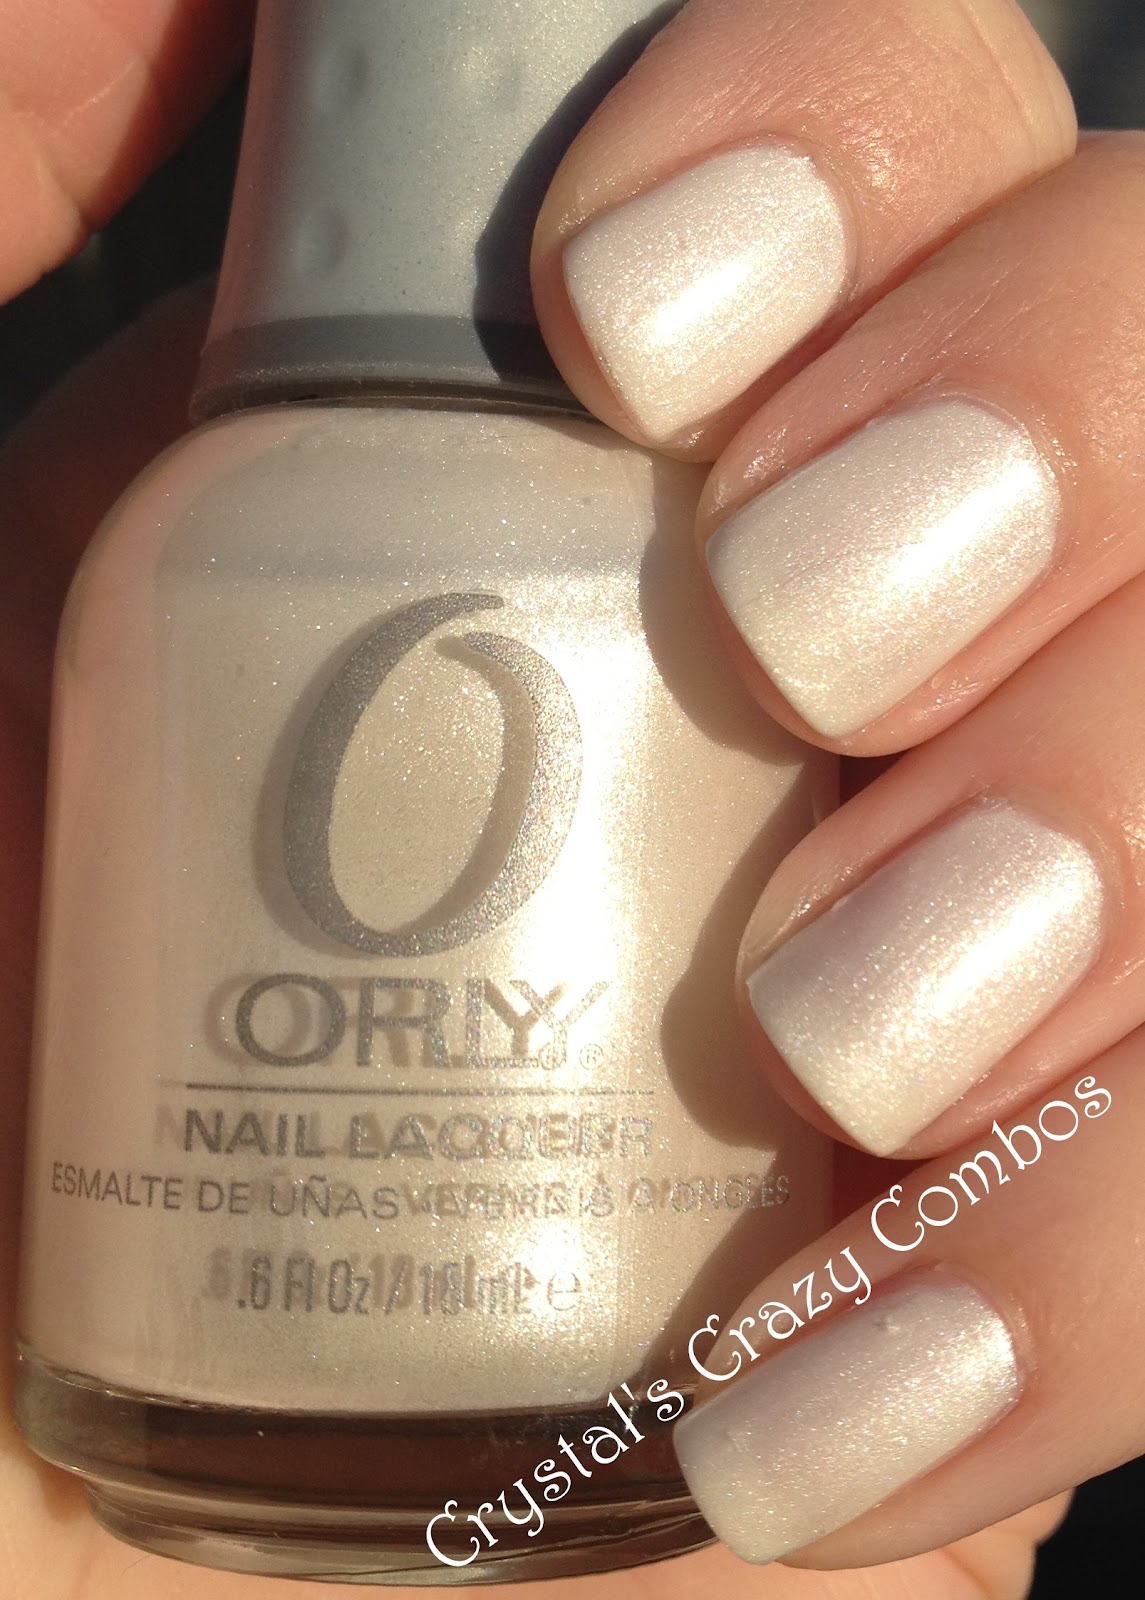 Crystal's Crazy Combos: Frankenstine Polish - May The Schwartz Be With You